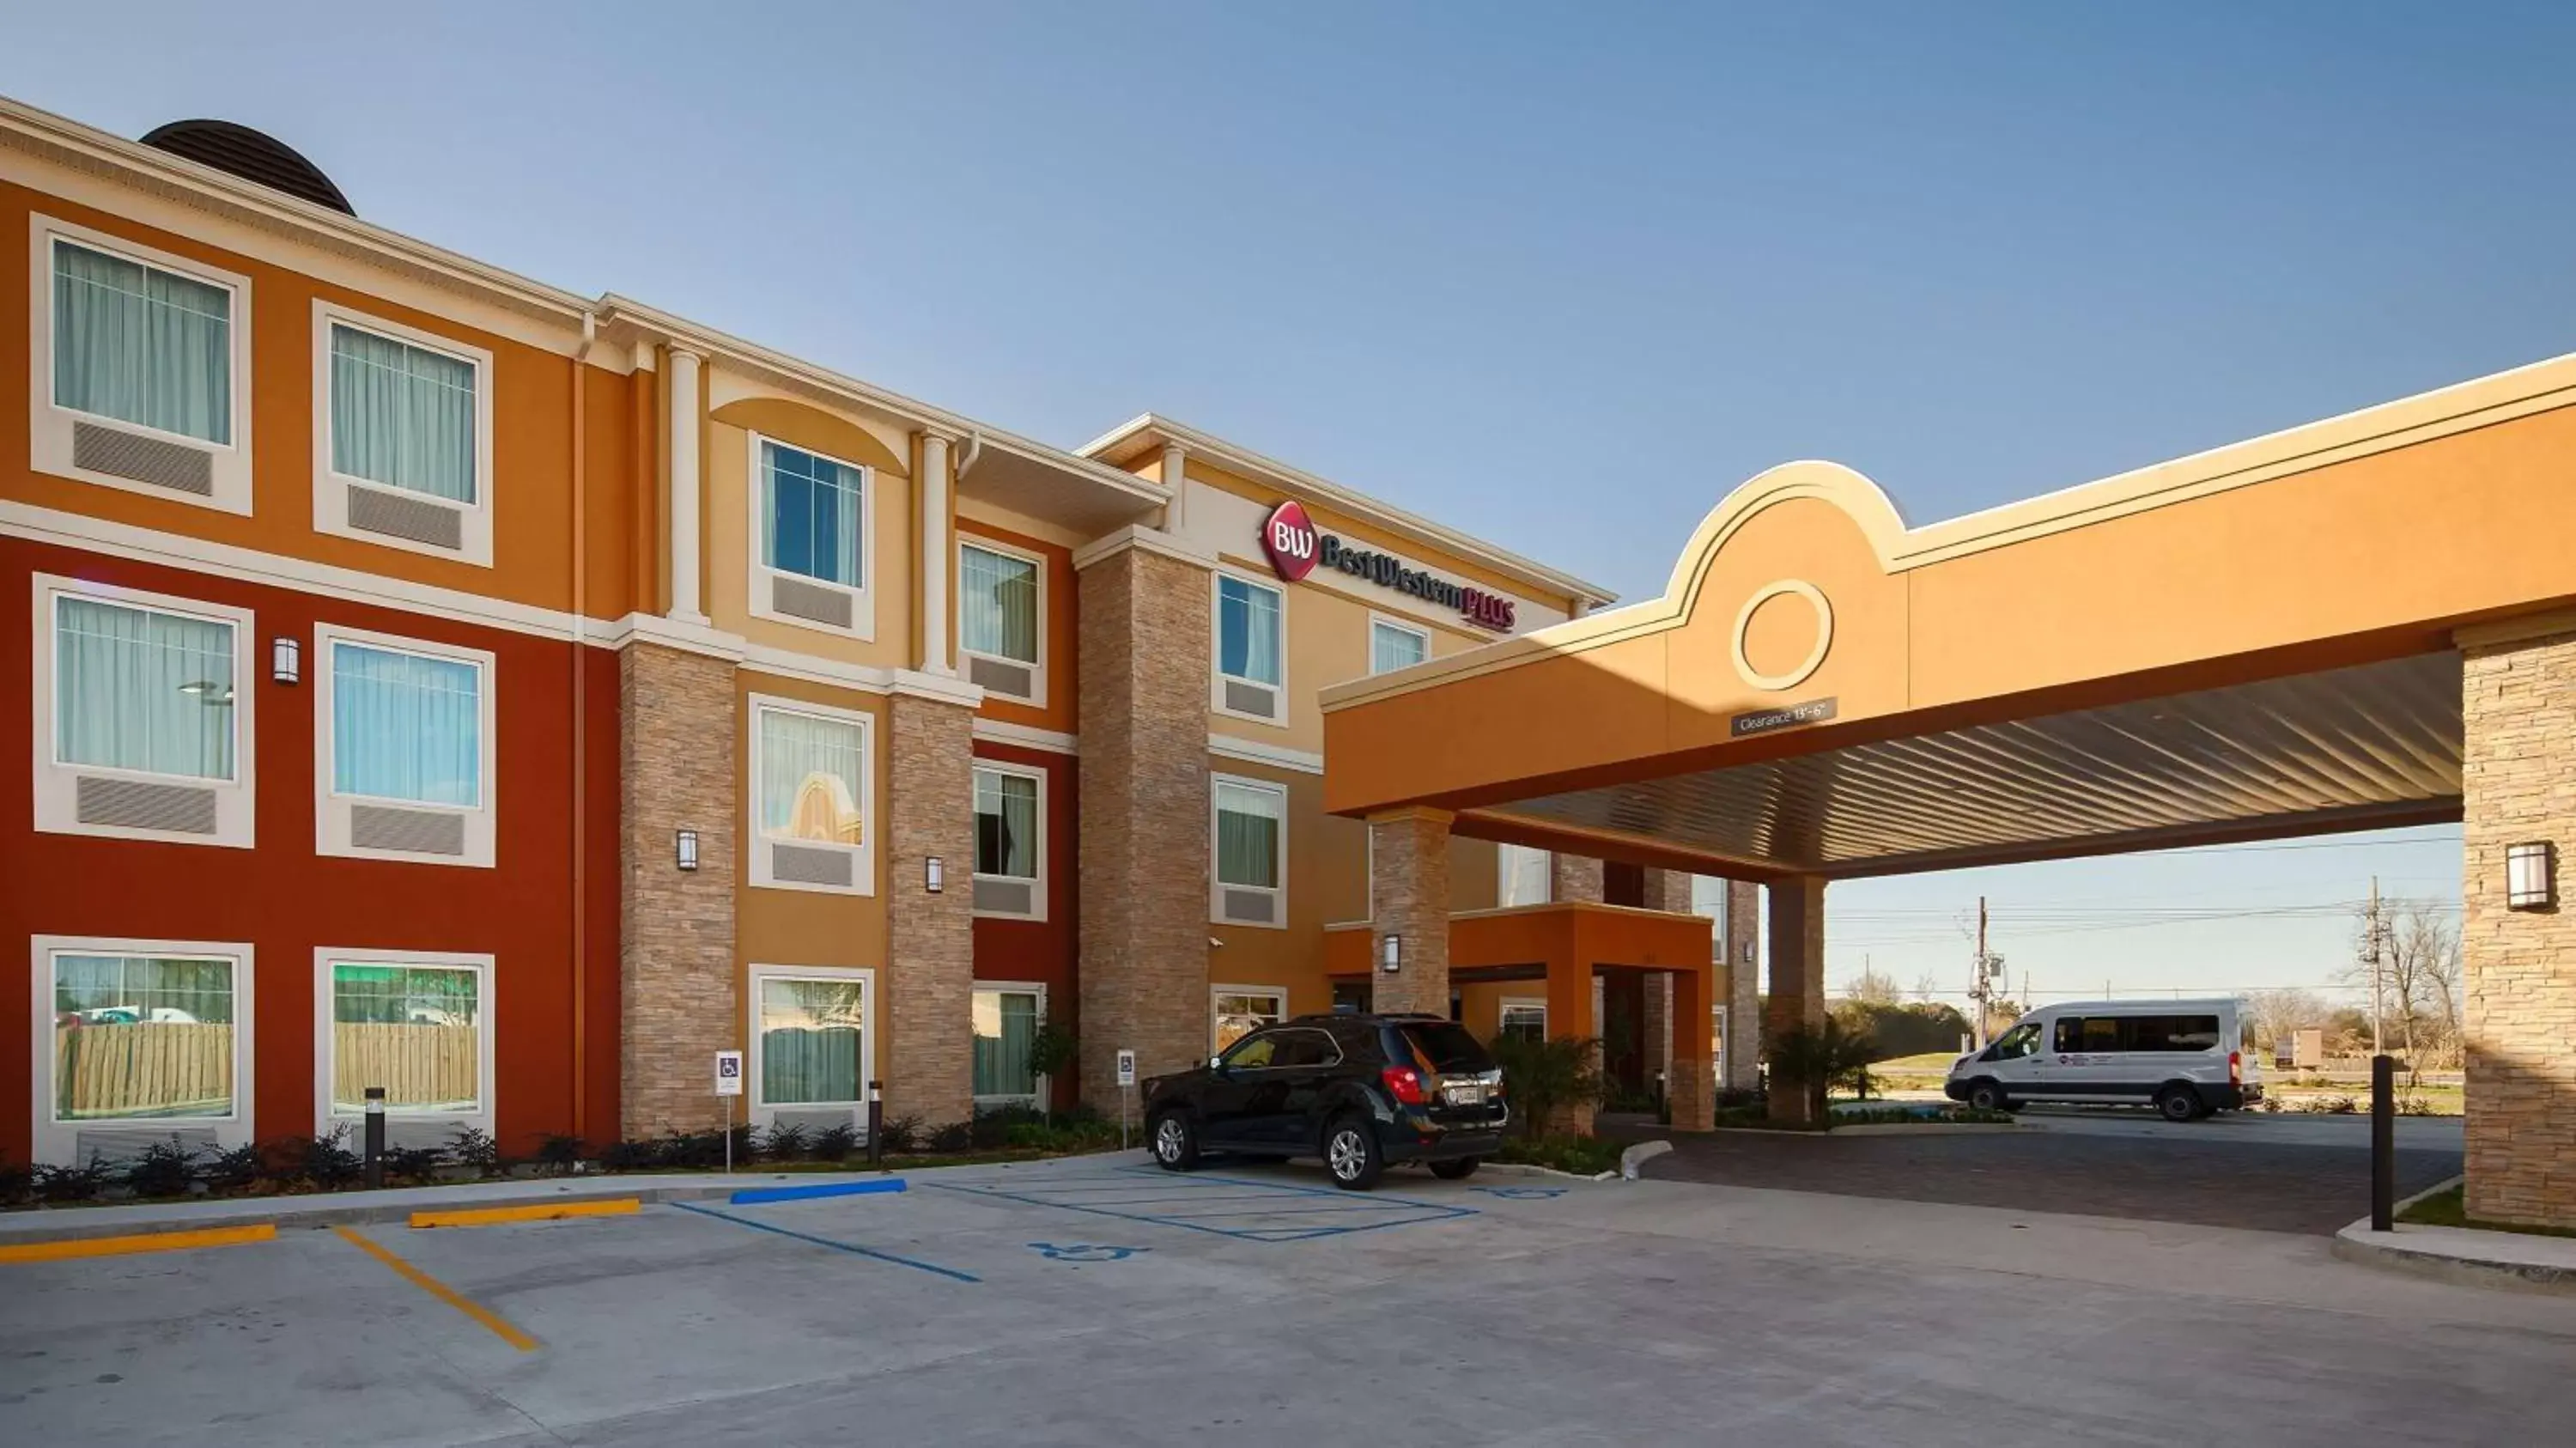 Property building in Best Western Plus New Orleans Airport Hotel